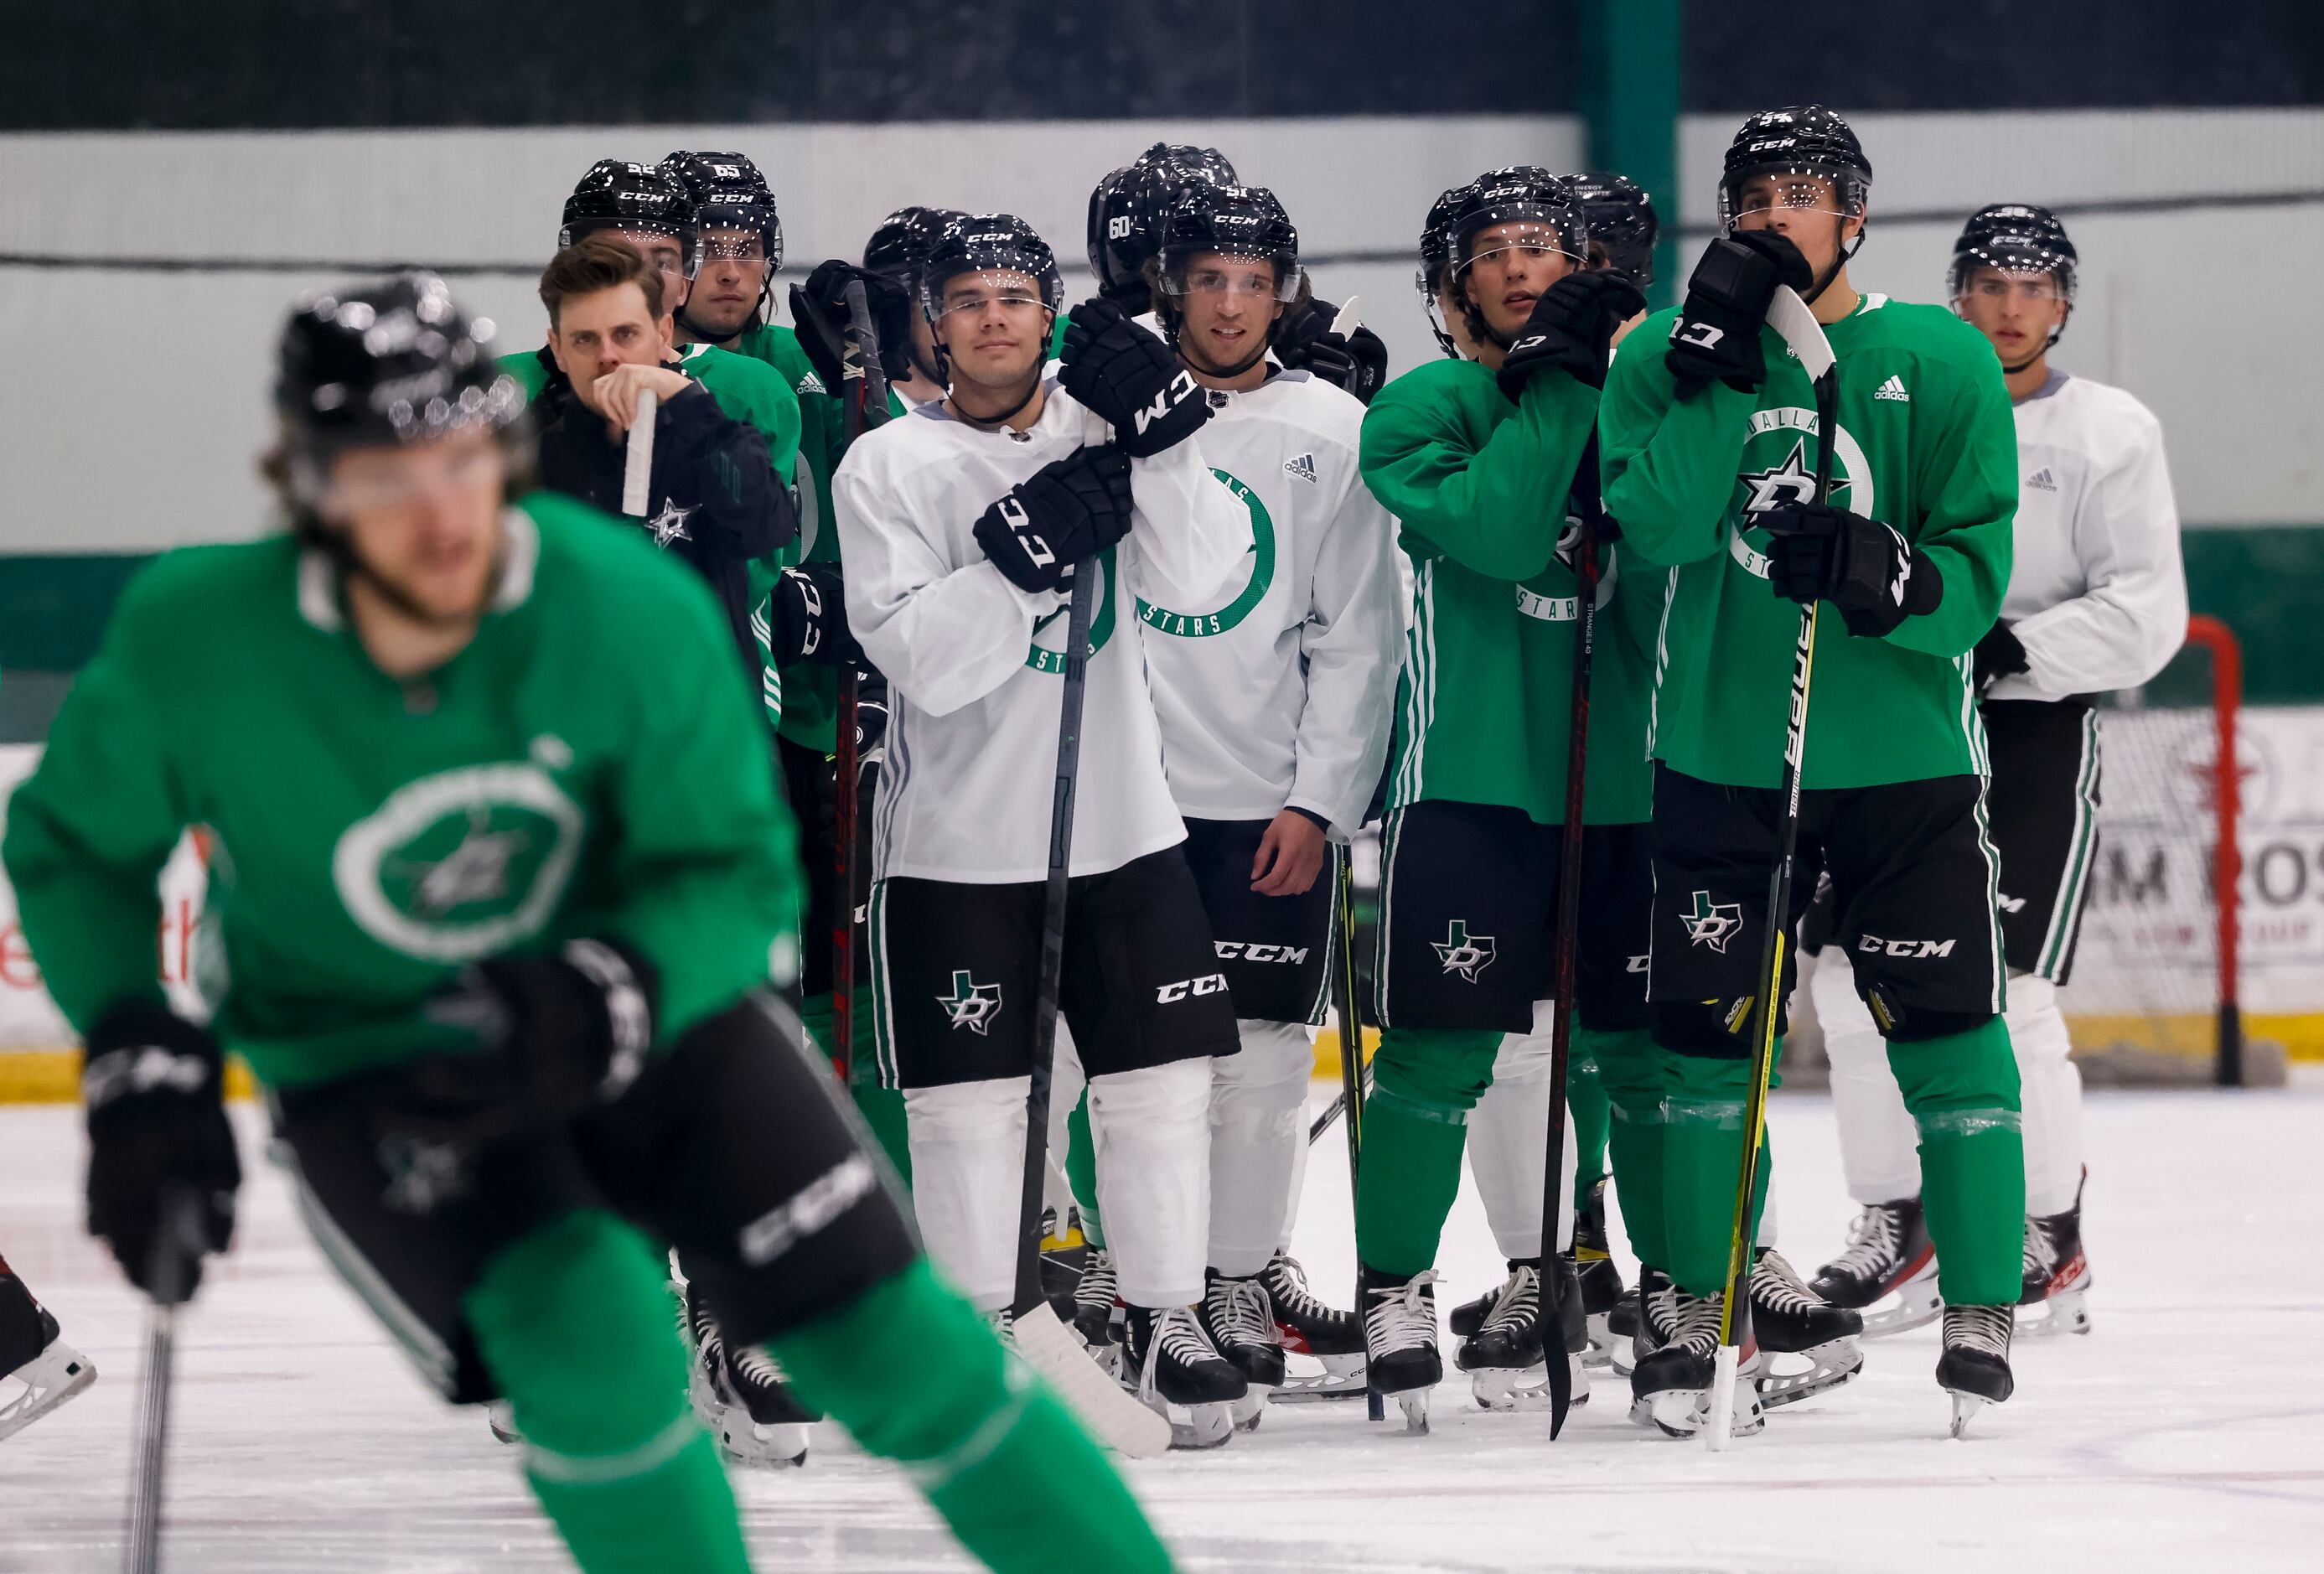 Stars announce roster, schedule for 2023 NHL Prospect Tournament